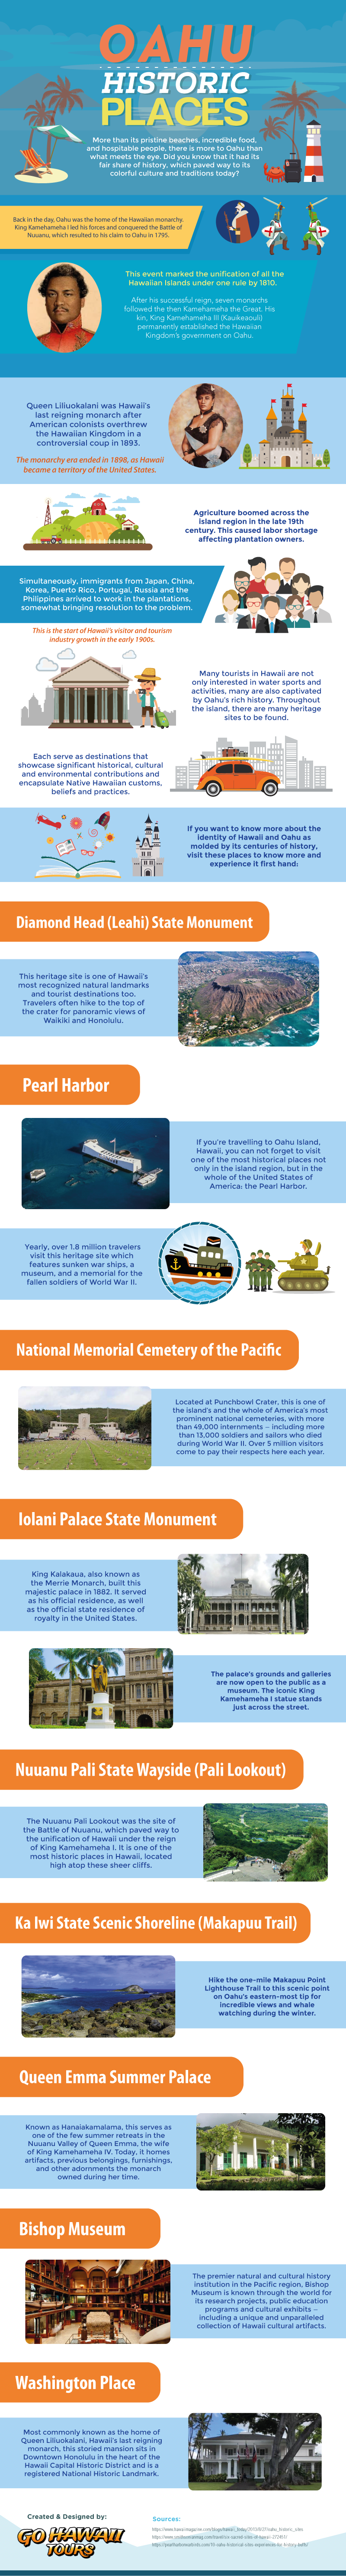 Oahu-Historic-Places-Infographic-image